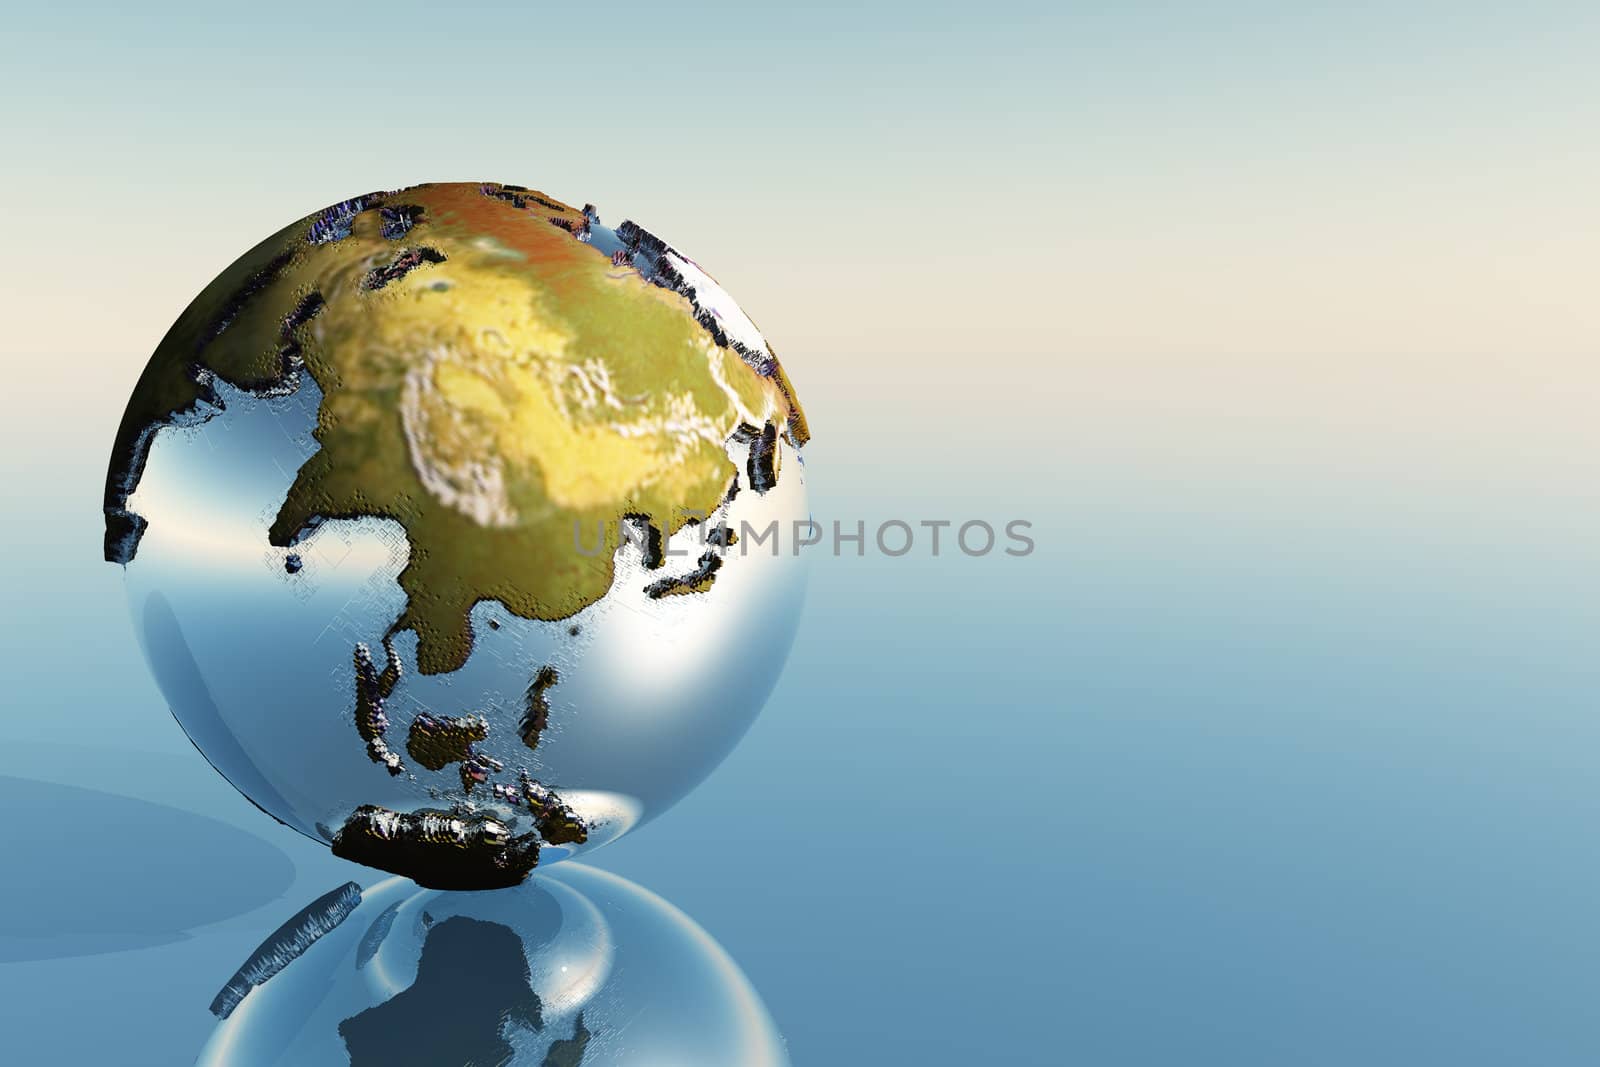 A world globe showing the continents of India, Asia and Japan.